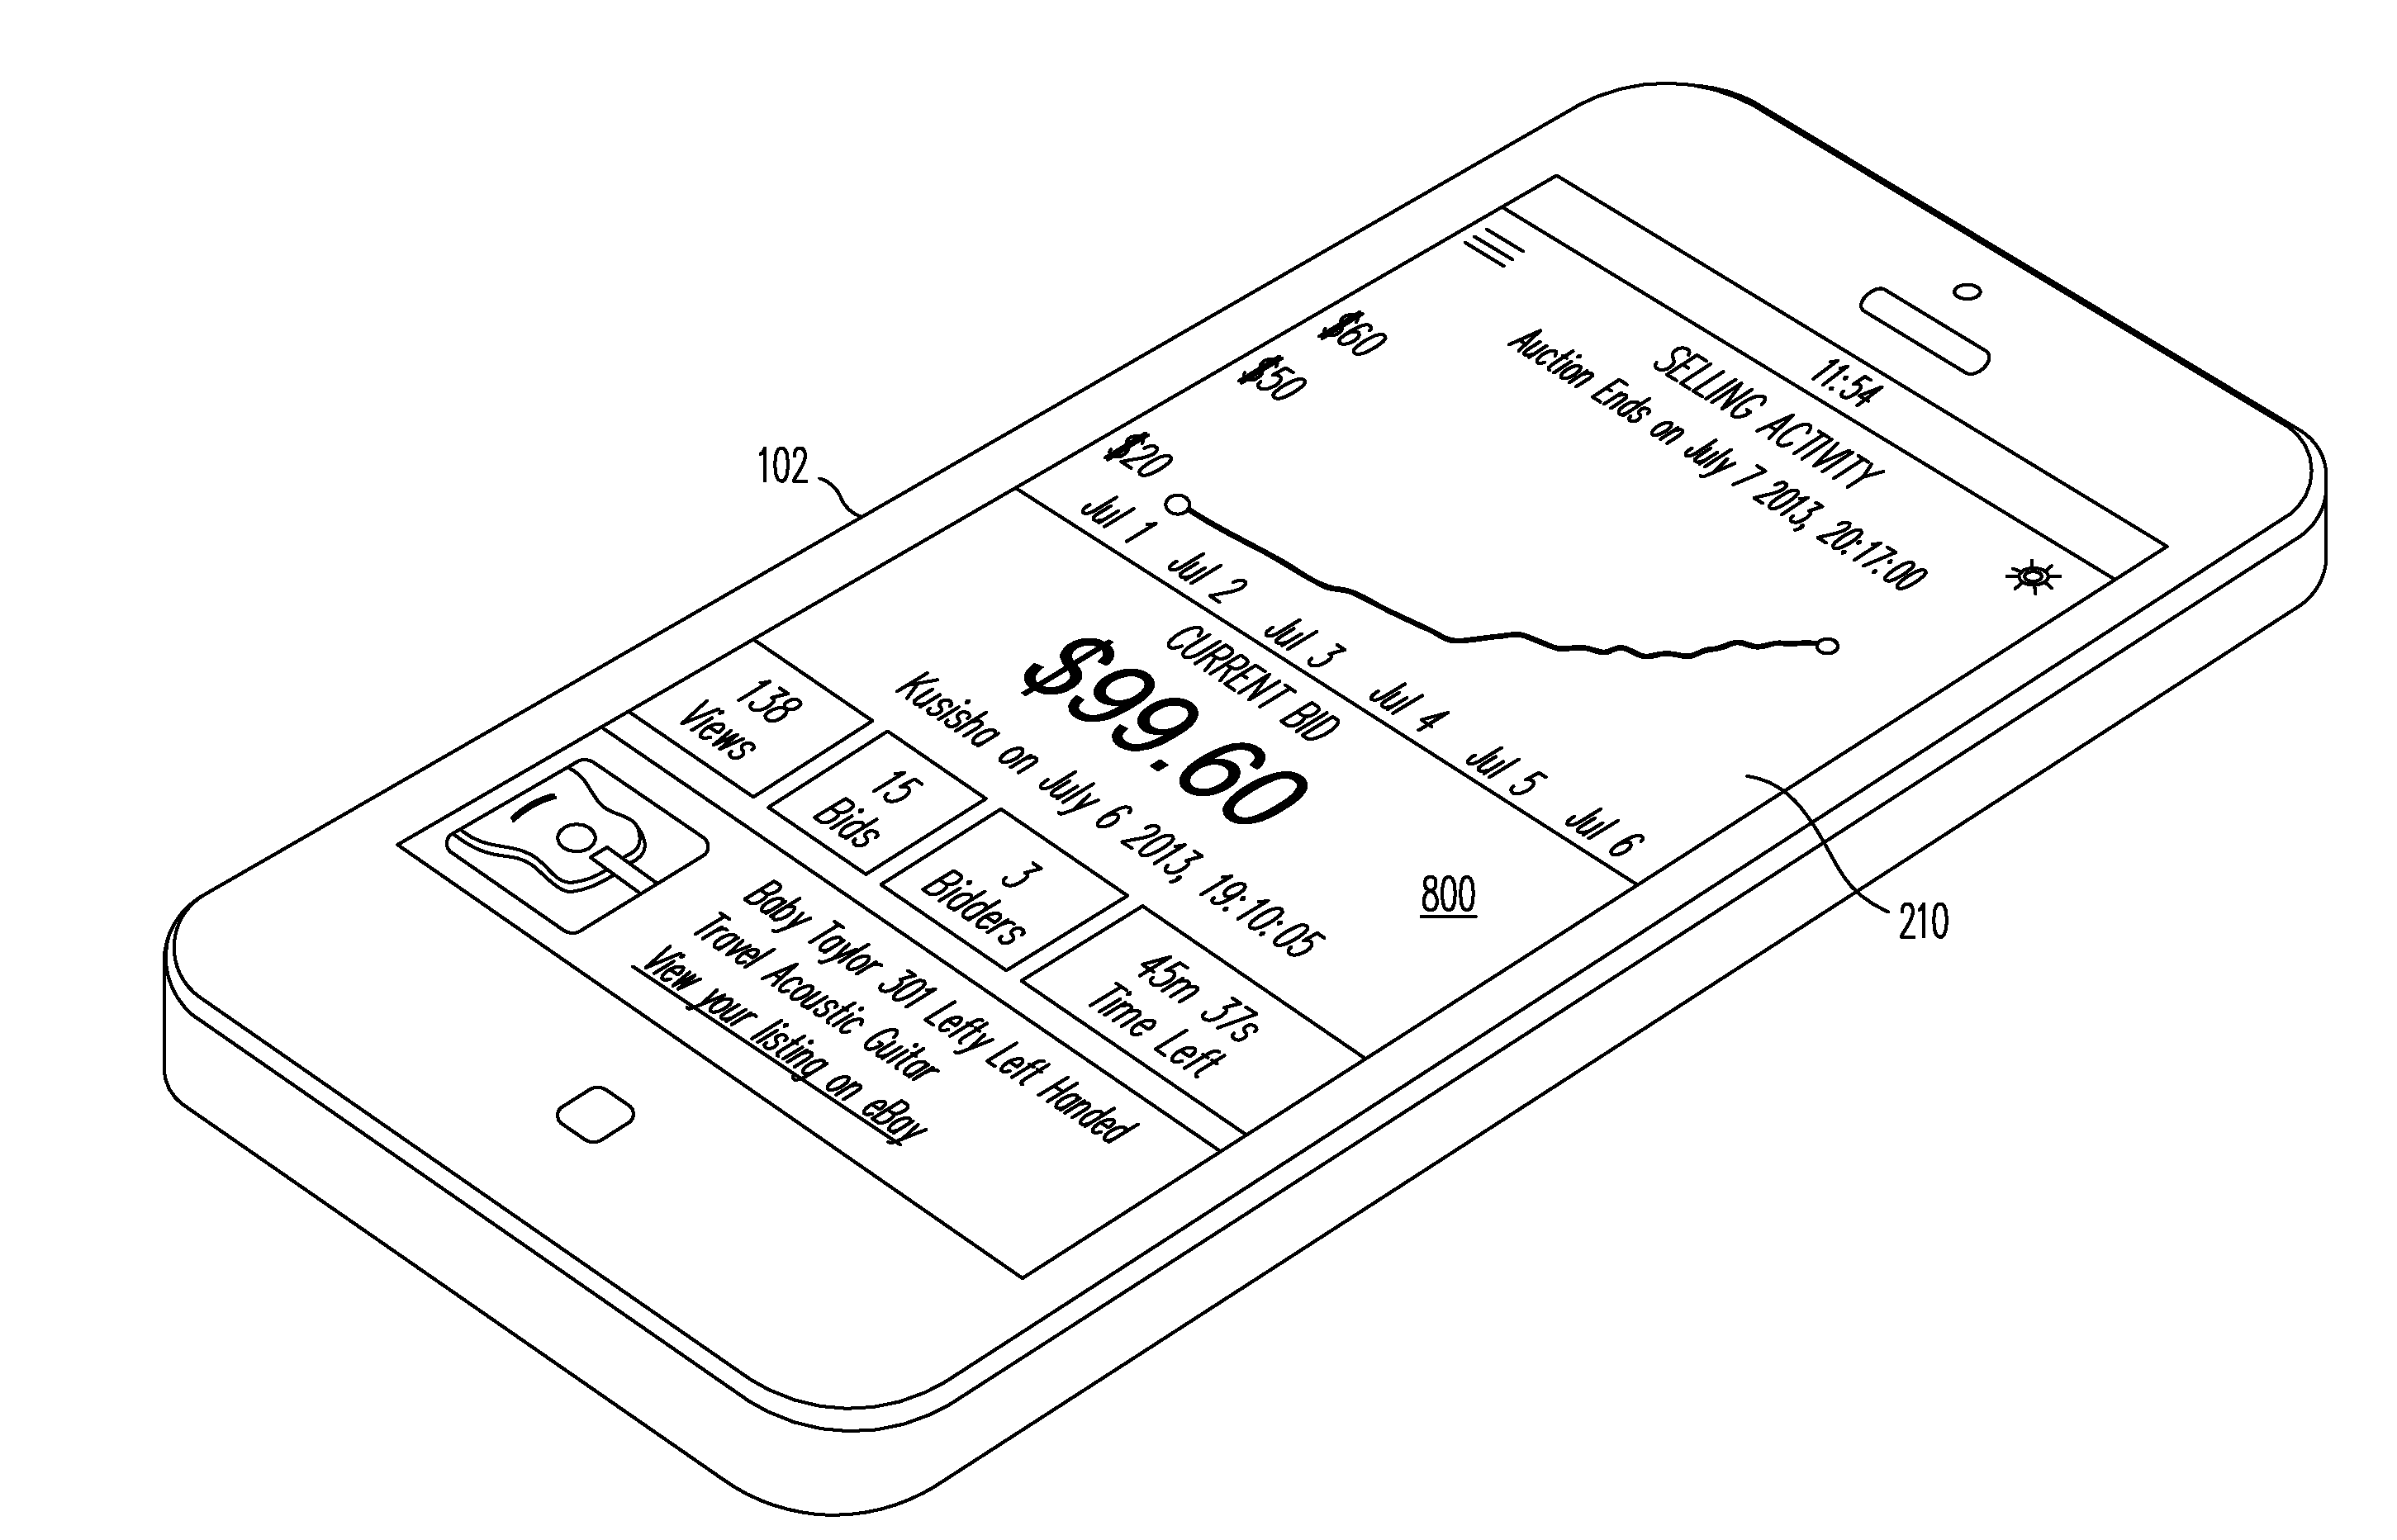 Systems and methods for providing selling assistance